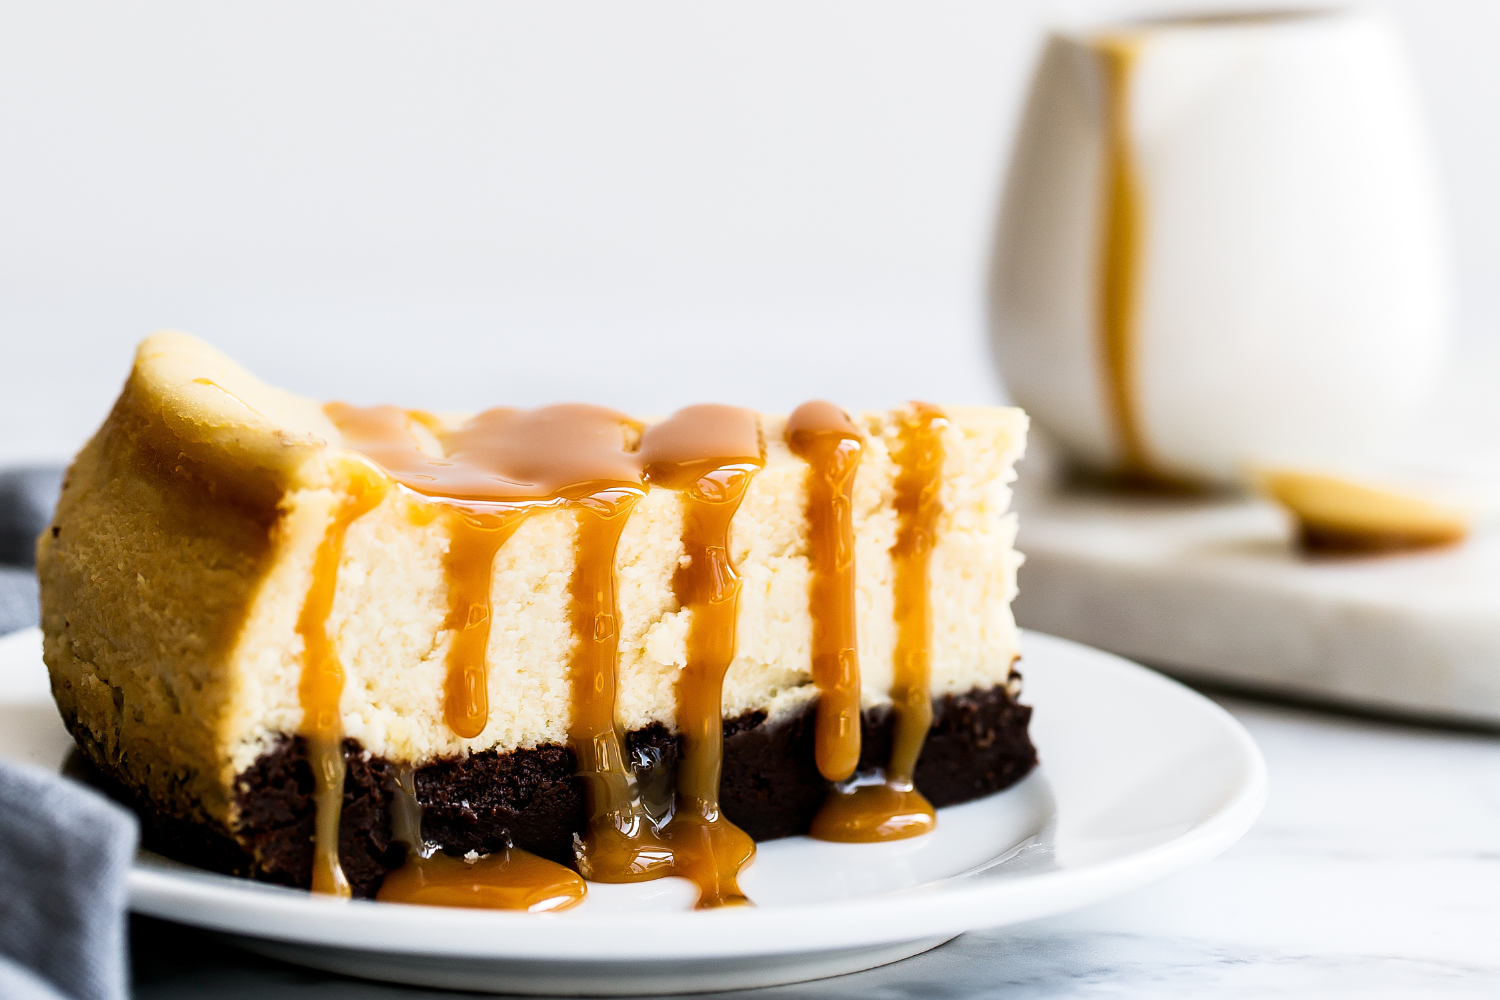 a slice of cheesecake on a plate, with salted caramel sauce drizzled over the top, dripping down the sides.